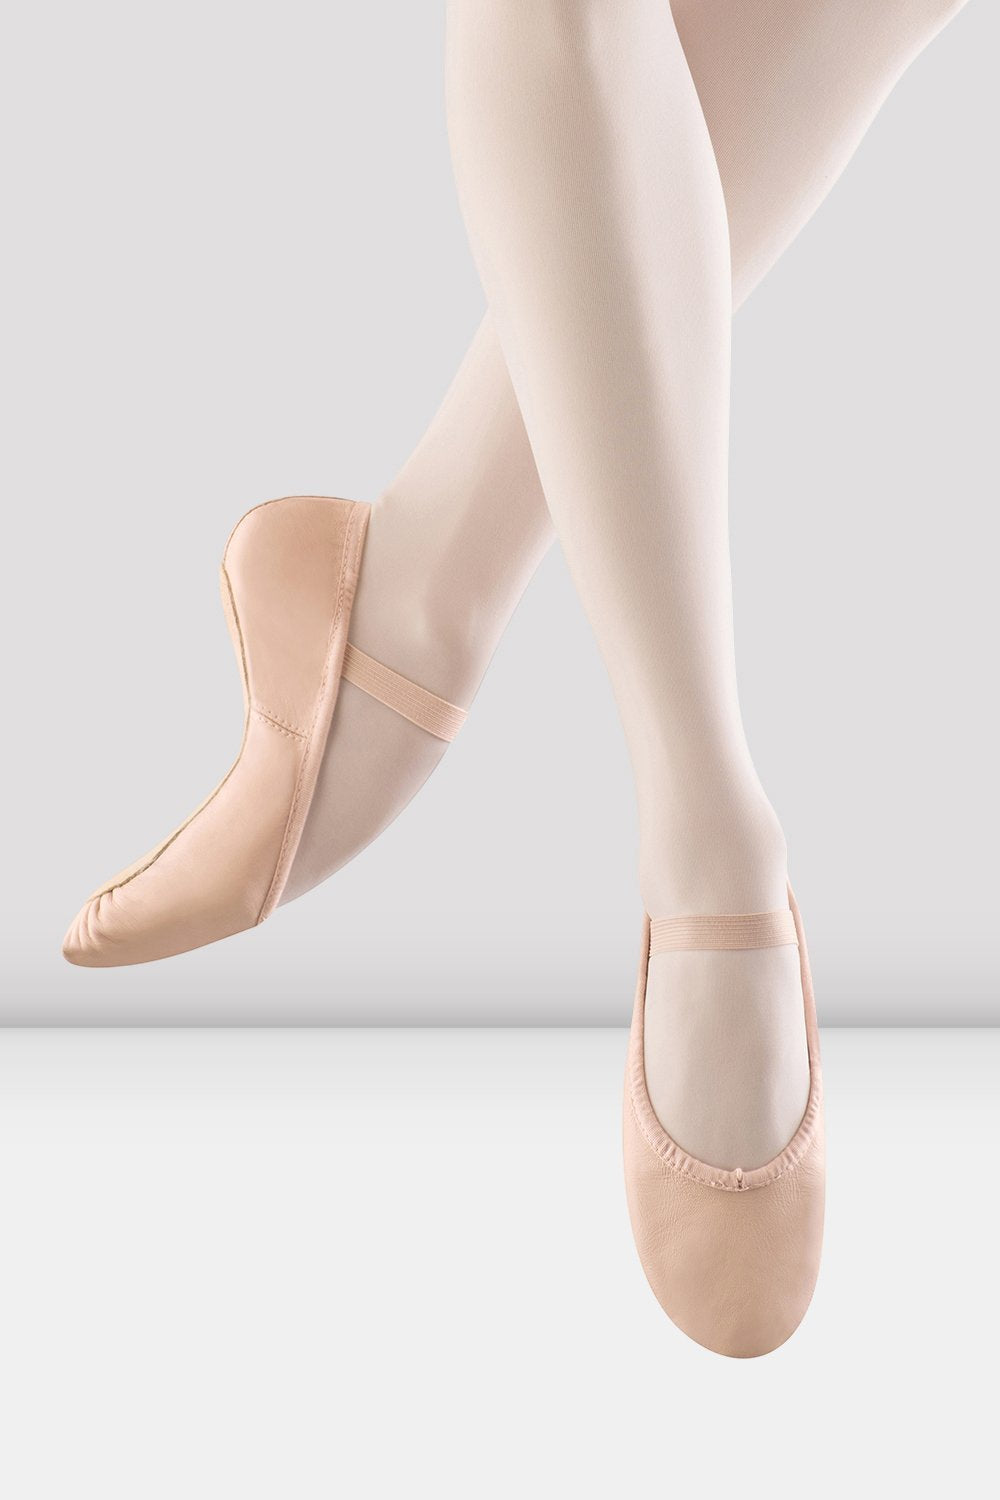 ballet shoes full sole